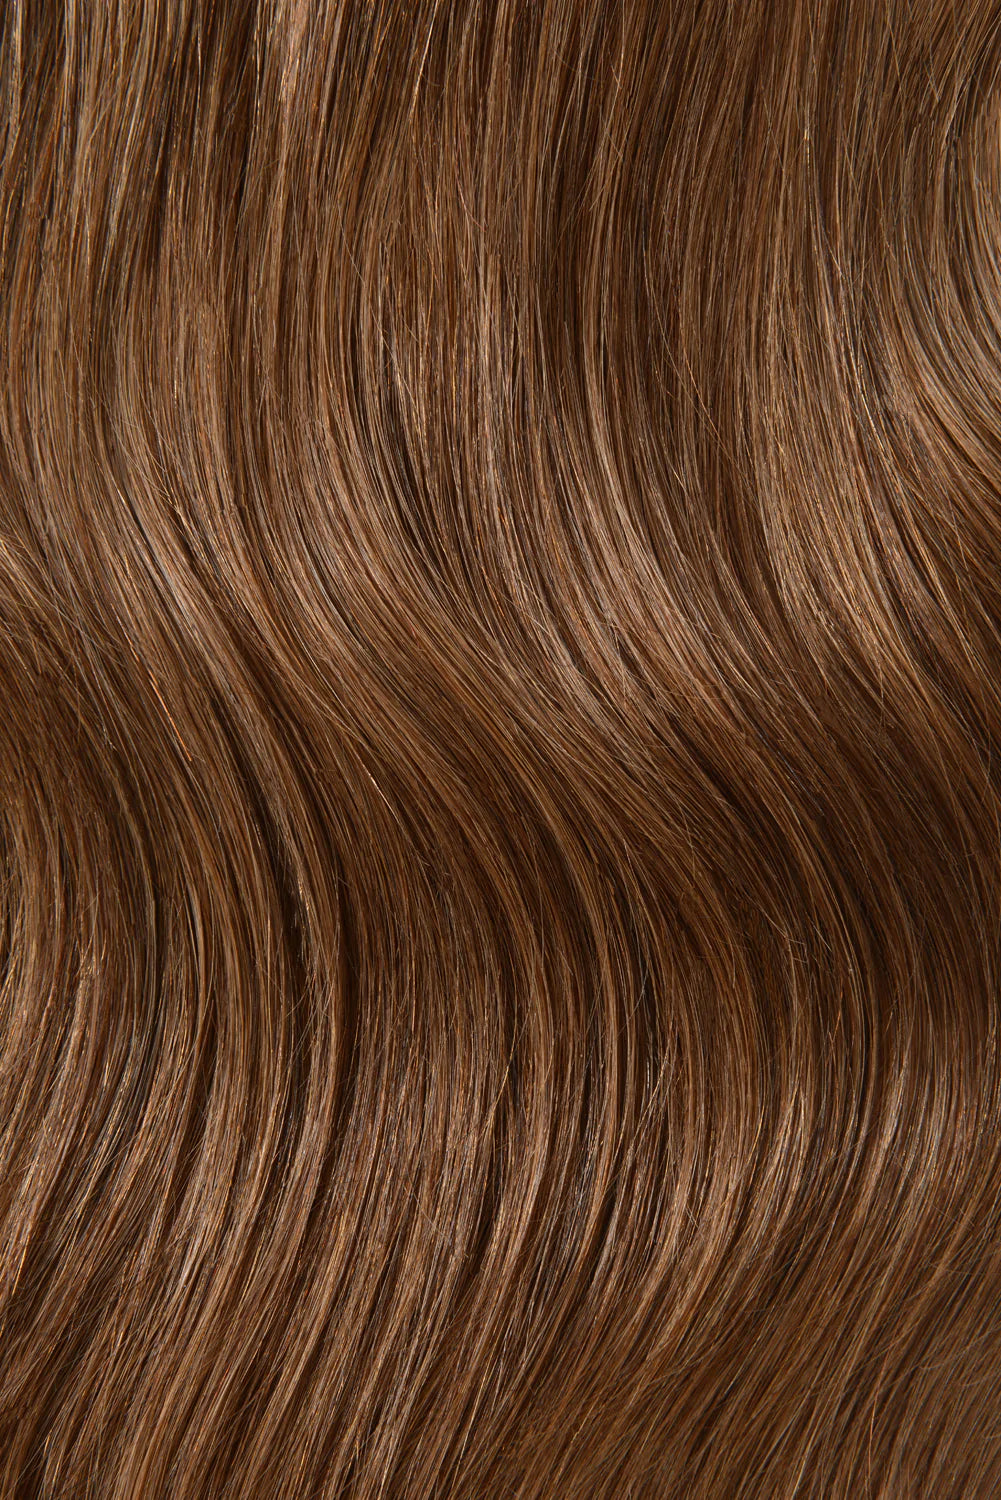 Toffee Brown (#5) Remy Royale Double Drawn Weave Extensions